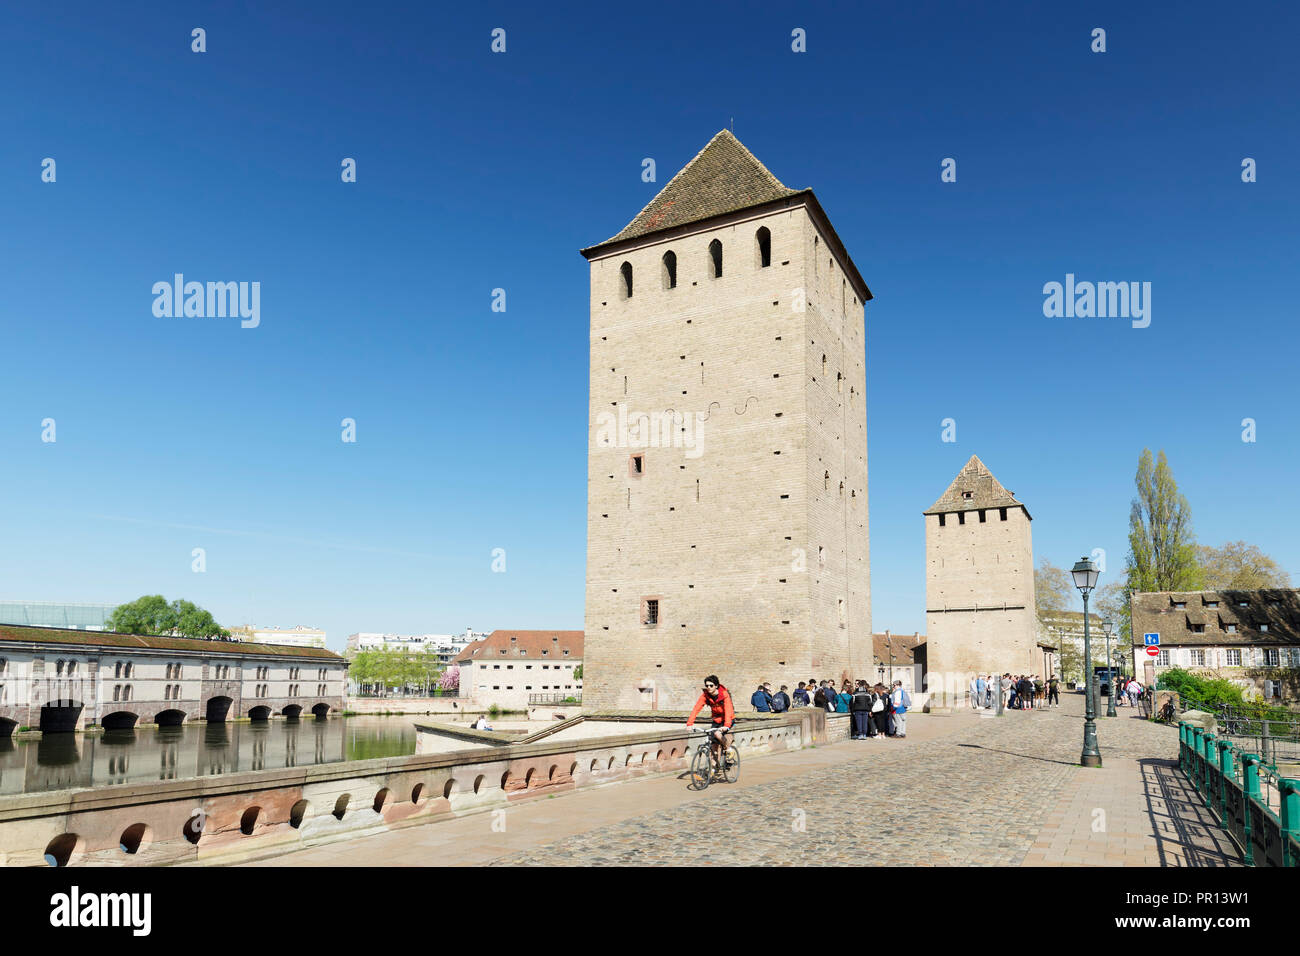 Ponts Couverts, Ill River, Barrage Vauban, UNESCO World Heritage Site, Strasbourg, Alsace, France, Europe Stock Photo